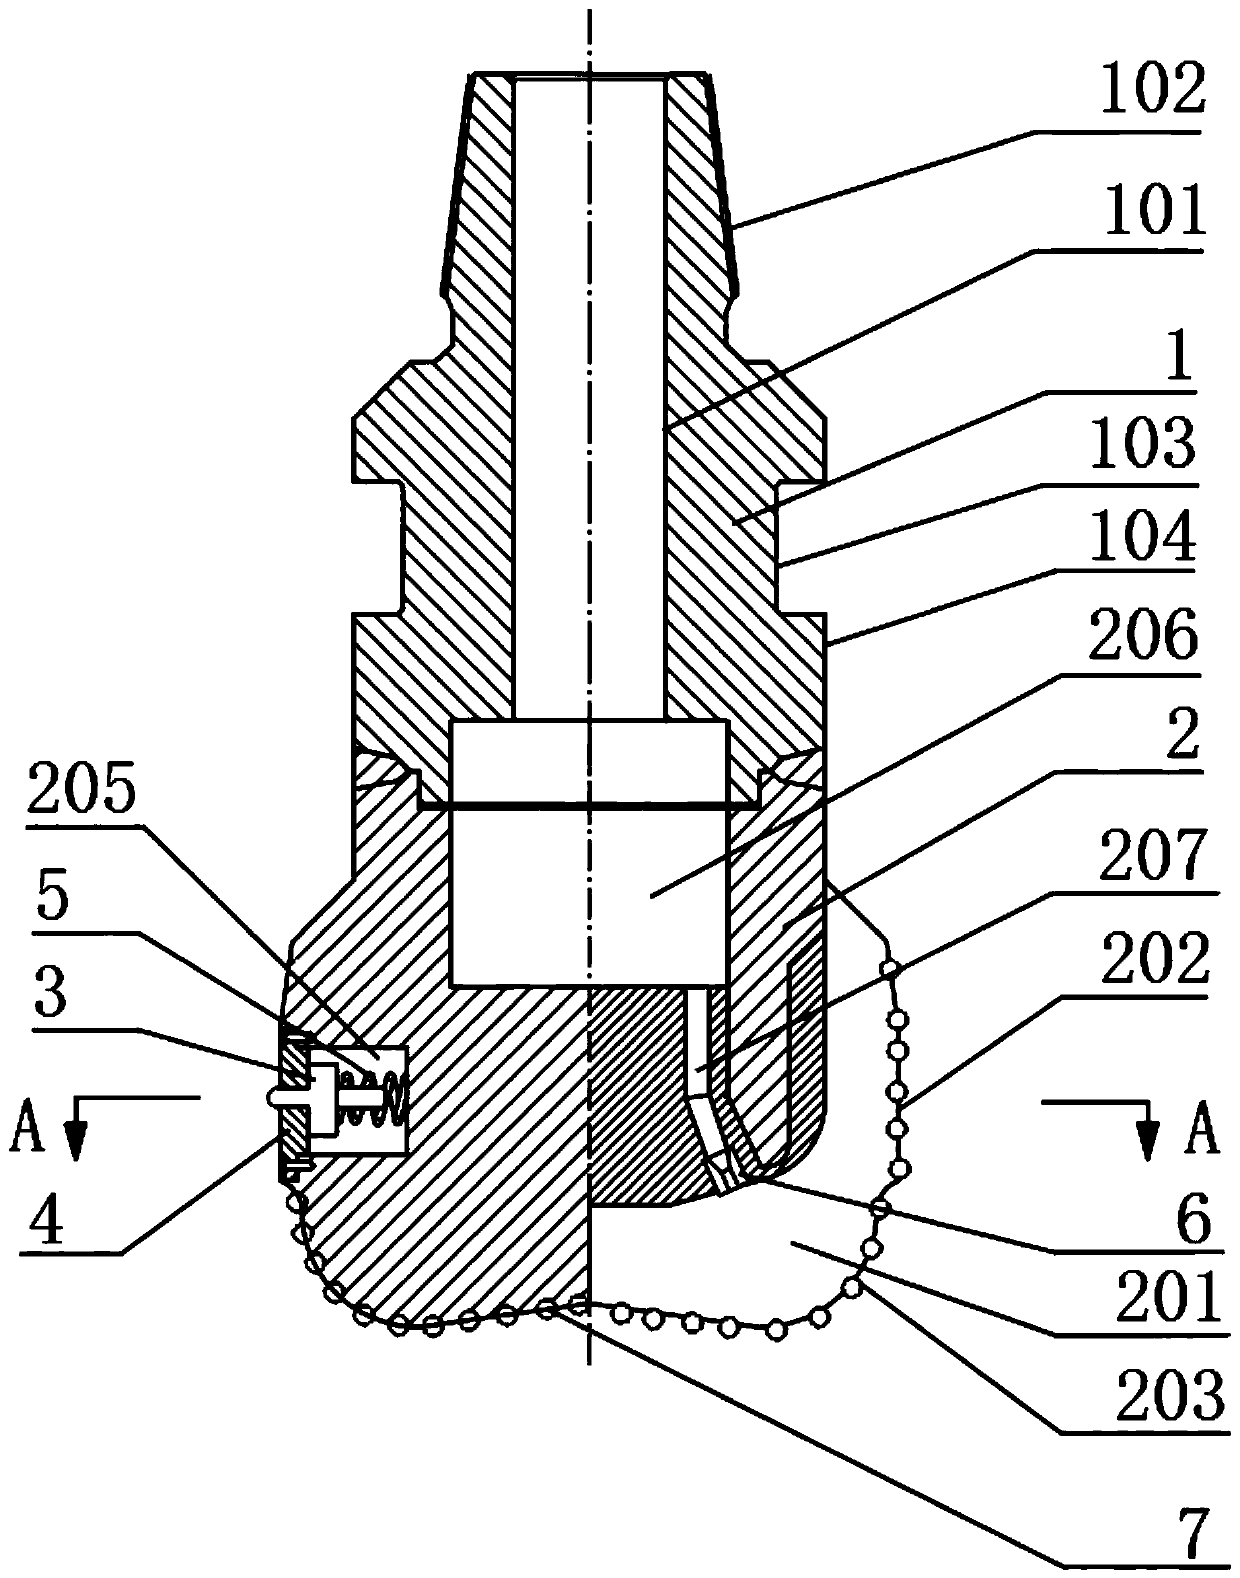 High-efficiency rock breaking drilling head for adjusting and controlling lateral cutting ability adaptively